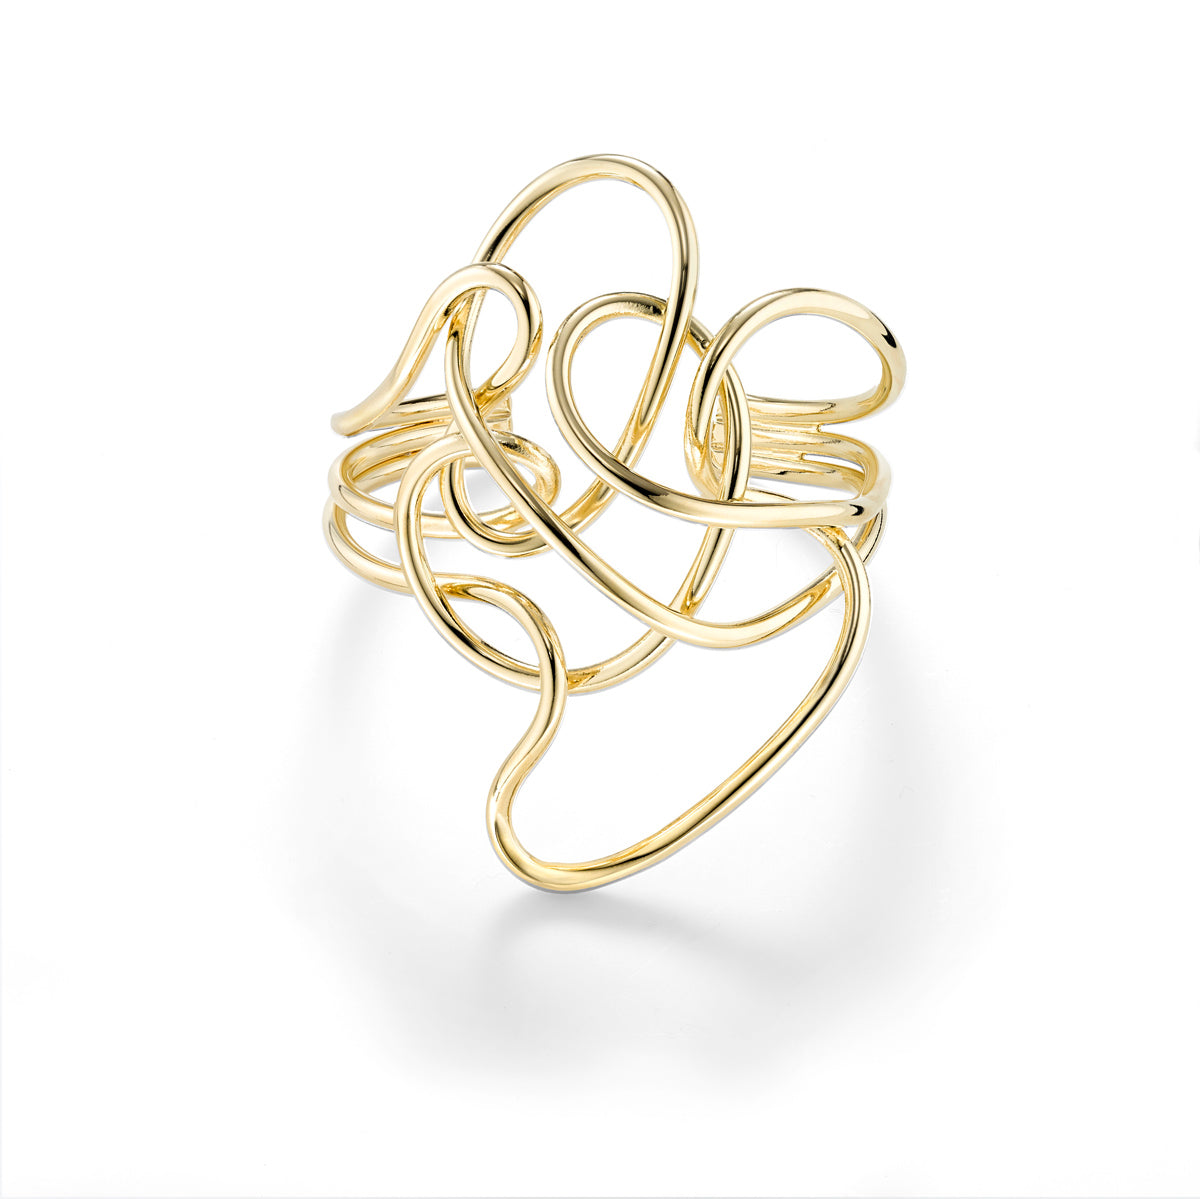 This cuff bracelet is truly one of a kind. Each piece is bent into a chaotic, yet fluid sculpture.  3mm wire is unforgiving when you start to bend it into sculptural shapes so each piece ends up being a unique gem.   You will have to trust that the process and the outcome as each one is unique.    Hand formed in brass and finished with 14k nickel free plating.  Send us an inquiry if you'd like a sterling silver piece. Also stop by Oblik studio in Brooklyn to try this on. It is a unique sculptural bracelet!